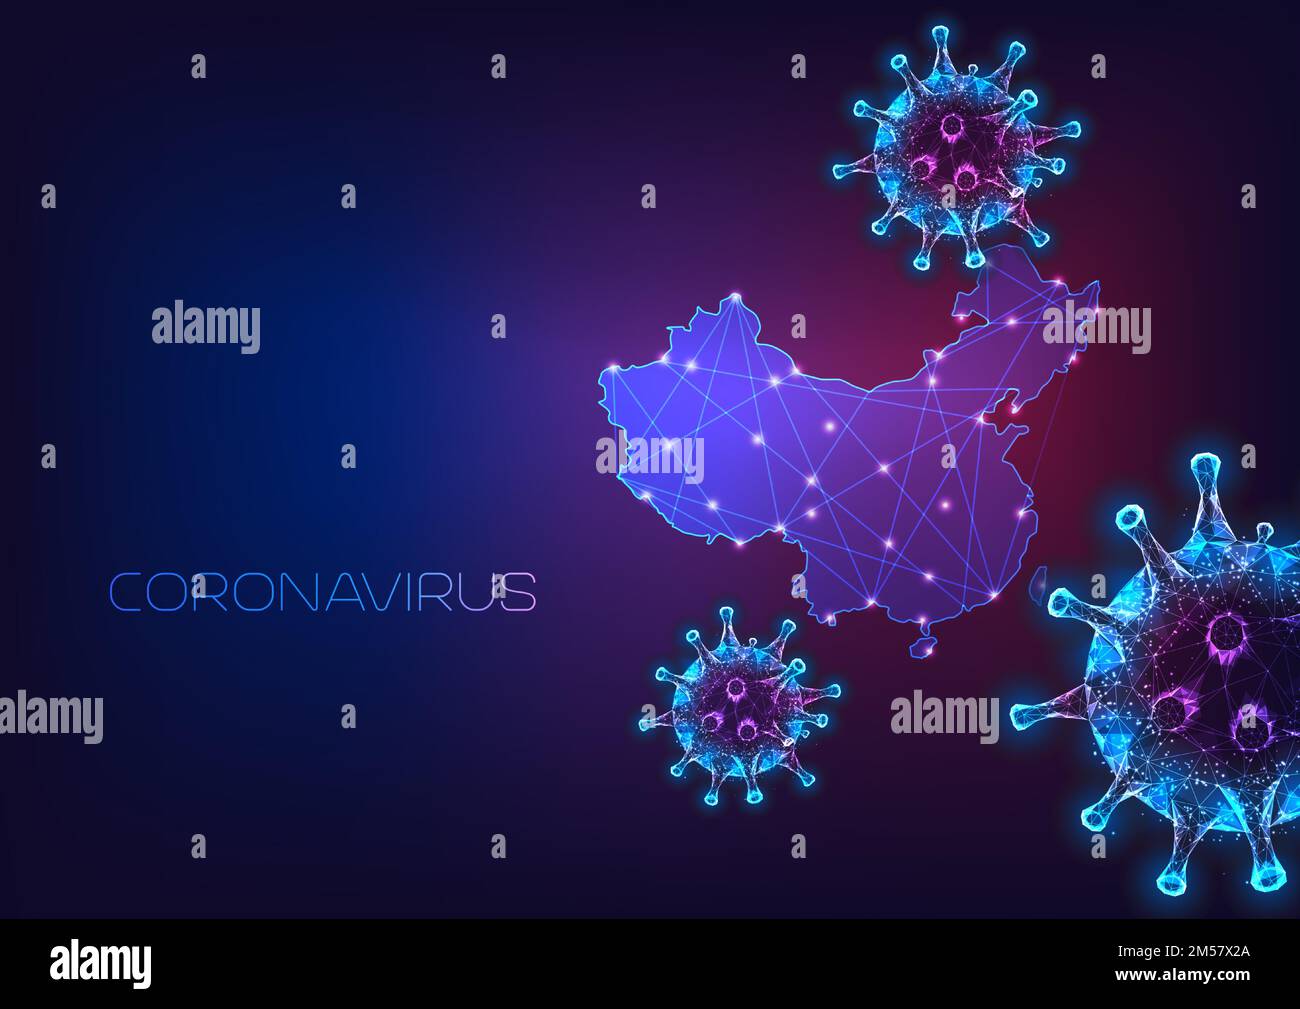 Coronavirus cells against map of China on dark blue to purple background. Viral infection outbreak. Modern wire frame mesh design vector illustration. Stock Vector